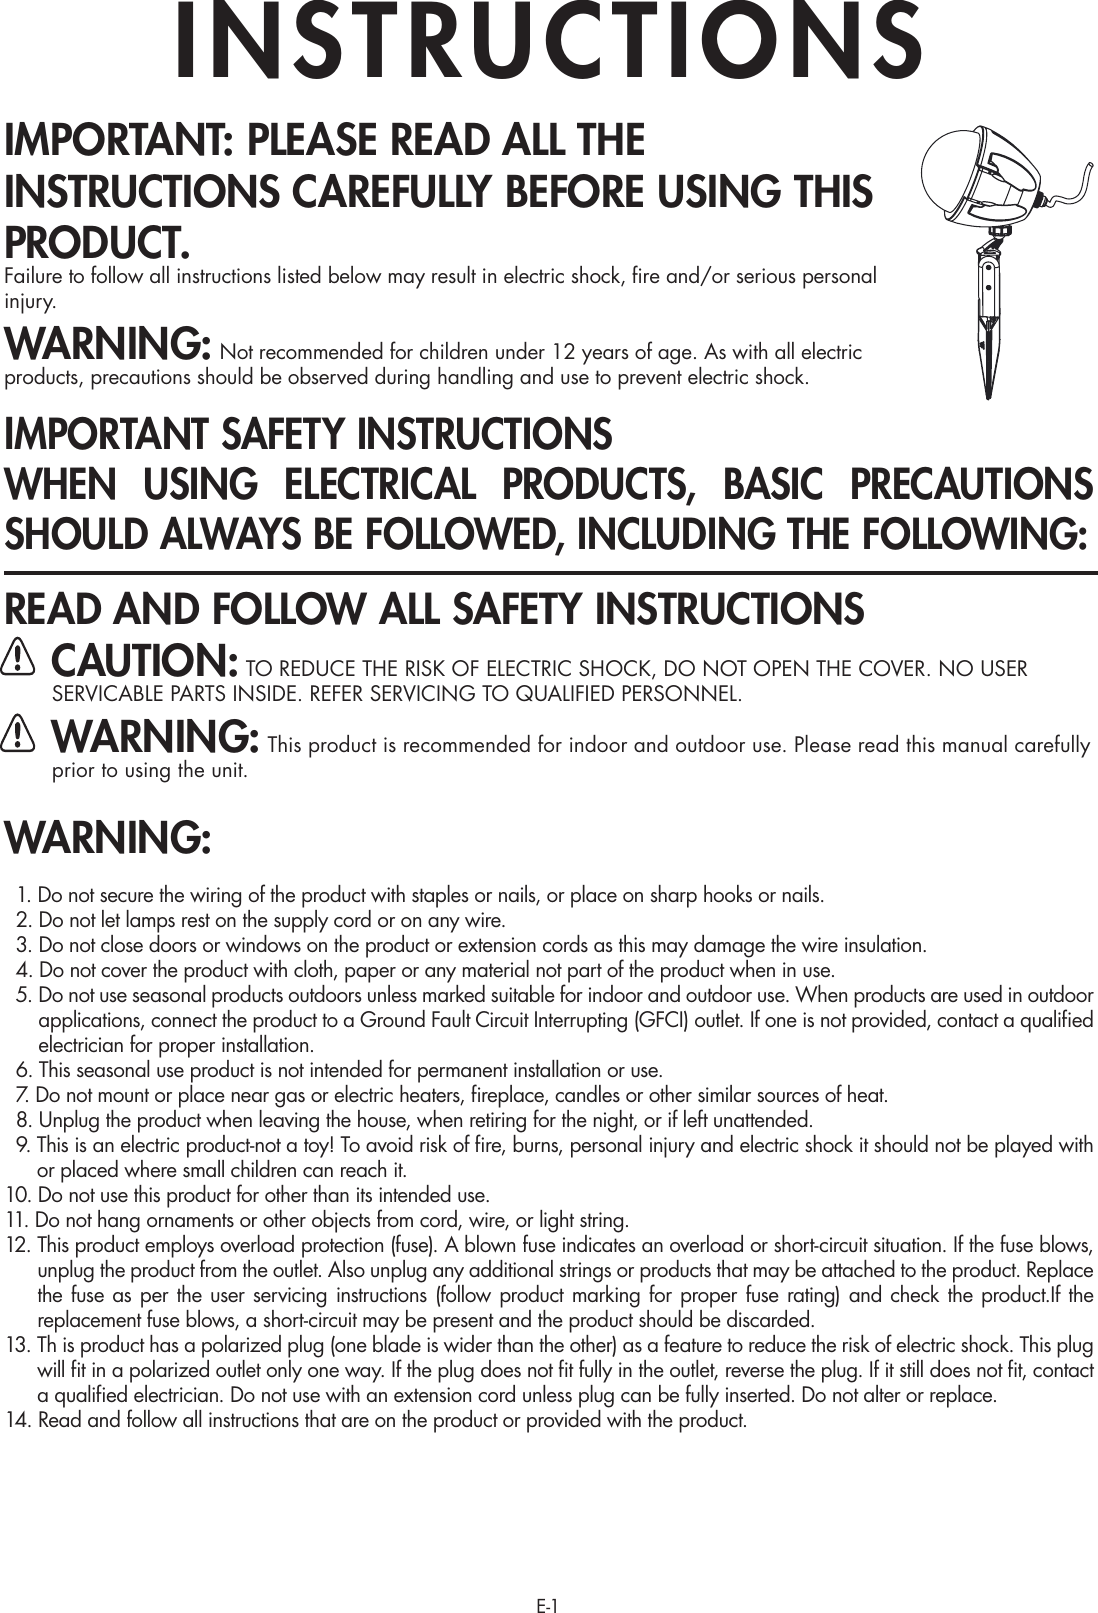 E-1IMPORTANT: PLEASE READ ALL THE INSTRUCTIONS CAREFULLY BEFORE USING THIS PRODUCT.Failure to follow all instructions listed below may result in electric shock, ﬁre and/or serious personal injury.WARNING: Not recommended for children under 12 years of age. As with all electric products, precautions should be observed during handling and use to prevent electric shock.IMPORTANT SAFETY INSTRUCTIONSWHEN USING ELECTRICAL PRODUCTS, BASIC PRECAUTIONS SHOULD ALWAYS BE FOLLOWED, INCLUDING THE FOLLOWING:READ AND FOLLOW ALL SAFETY INSTRUCTIONS CAUTION: TO REDUCE THE RISK OF ELECTRIC SHOCK, DO NOT OPEN THE COVER. NO USER SERVICABLE PARTS INSIDE. REFER SERVICING TO QUALIFIED PERSONNEL. WARNING: This product is recommended for indoor and outdoor use. Please read this manual carefully      prior to using the unit.WARNING:  1. Do not secure the wiring of the product with staples or nails, or place on sharp hooks or nails.  2. Do not let lamps rest on the supply cord or on any wire.  3. Do not close doors or windows on the product or extension cords as this may damage the wire insulation.  4. Do not cover the product with cloth, paper or any material not part of the product when in use.  5.  Do not use seasonal products outdoors unless marked suitable for indoor and outdoor use. When products are used in outdoor applications, connect the product to a Ground Fault Circuit Interrupting (GFCI) outlet. If one is not provided, contact a qualiﬁed electrician for proper installation.  6.  This seasonal use product is not intended for permanent installation or use.  7.  Do not mount or place near gas or electric heaters, ﬁreplace, candles or other similar sources of heat.  8.  Unplug the product when leaving the house, when retiring for the night, or if left unattended.  9.  This is an electric product-not a toy! To avoid risk of ﬁre, burns, personal injury and electric shock it should not be played with or placed where small children can reach it.10.  Do not use this product for other than its intended use.11. Do not hang ornaments or other objects from cord, wire, or light string.12.  This product employs overload protection (fuse). A blown fuse indicates an overload or short-circuit situation. If the fuse blows, unplug the product from the outlet. Also unplug any additional strings or products that may be attached to the product. Replace the fuse as per the user servicing instructions (follow product marking for proper fuse rating) and check the product.If the replacement fuse blows, a short-circuit may be present and the product should be discarded.13.  Th is product has a polarized plug (one blade is wider than the other) as a feature to reduce the risk of electric shock. This plug will ﬁt in a polarized outlet only one way. If the plug does not ﬁt fully in the outlet, reverse the plug. If it still does not ﬁt, contact a qualiﬁed electrician. Do not use with an extension cord unless plug can be fully inserted. Do not alter or replace.14. Read and follow all instructions that are on the product or provided with the product.INSTRUCTIONS